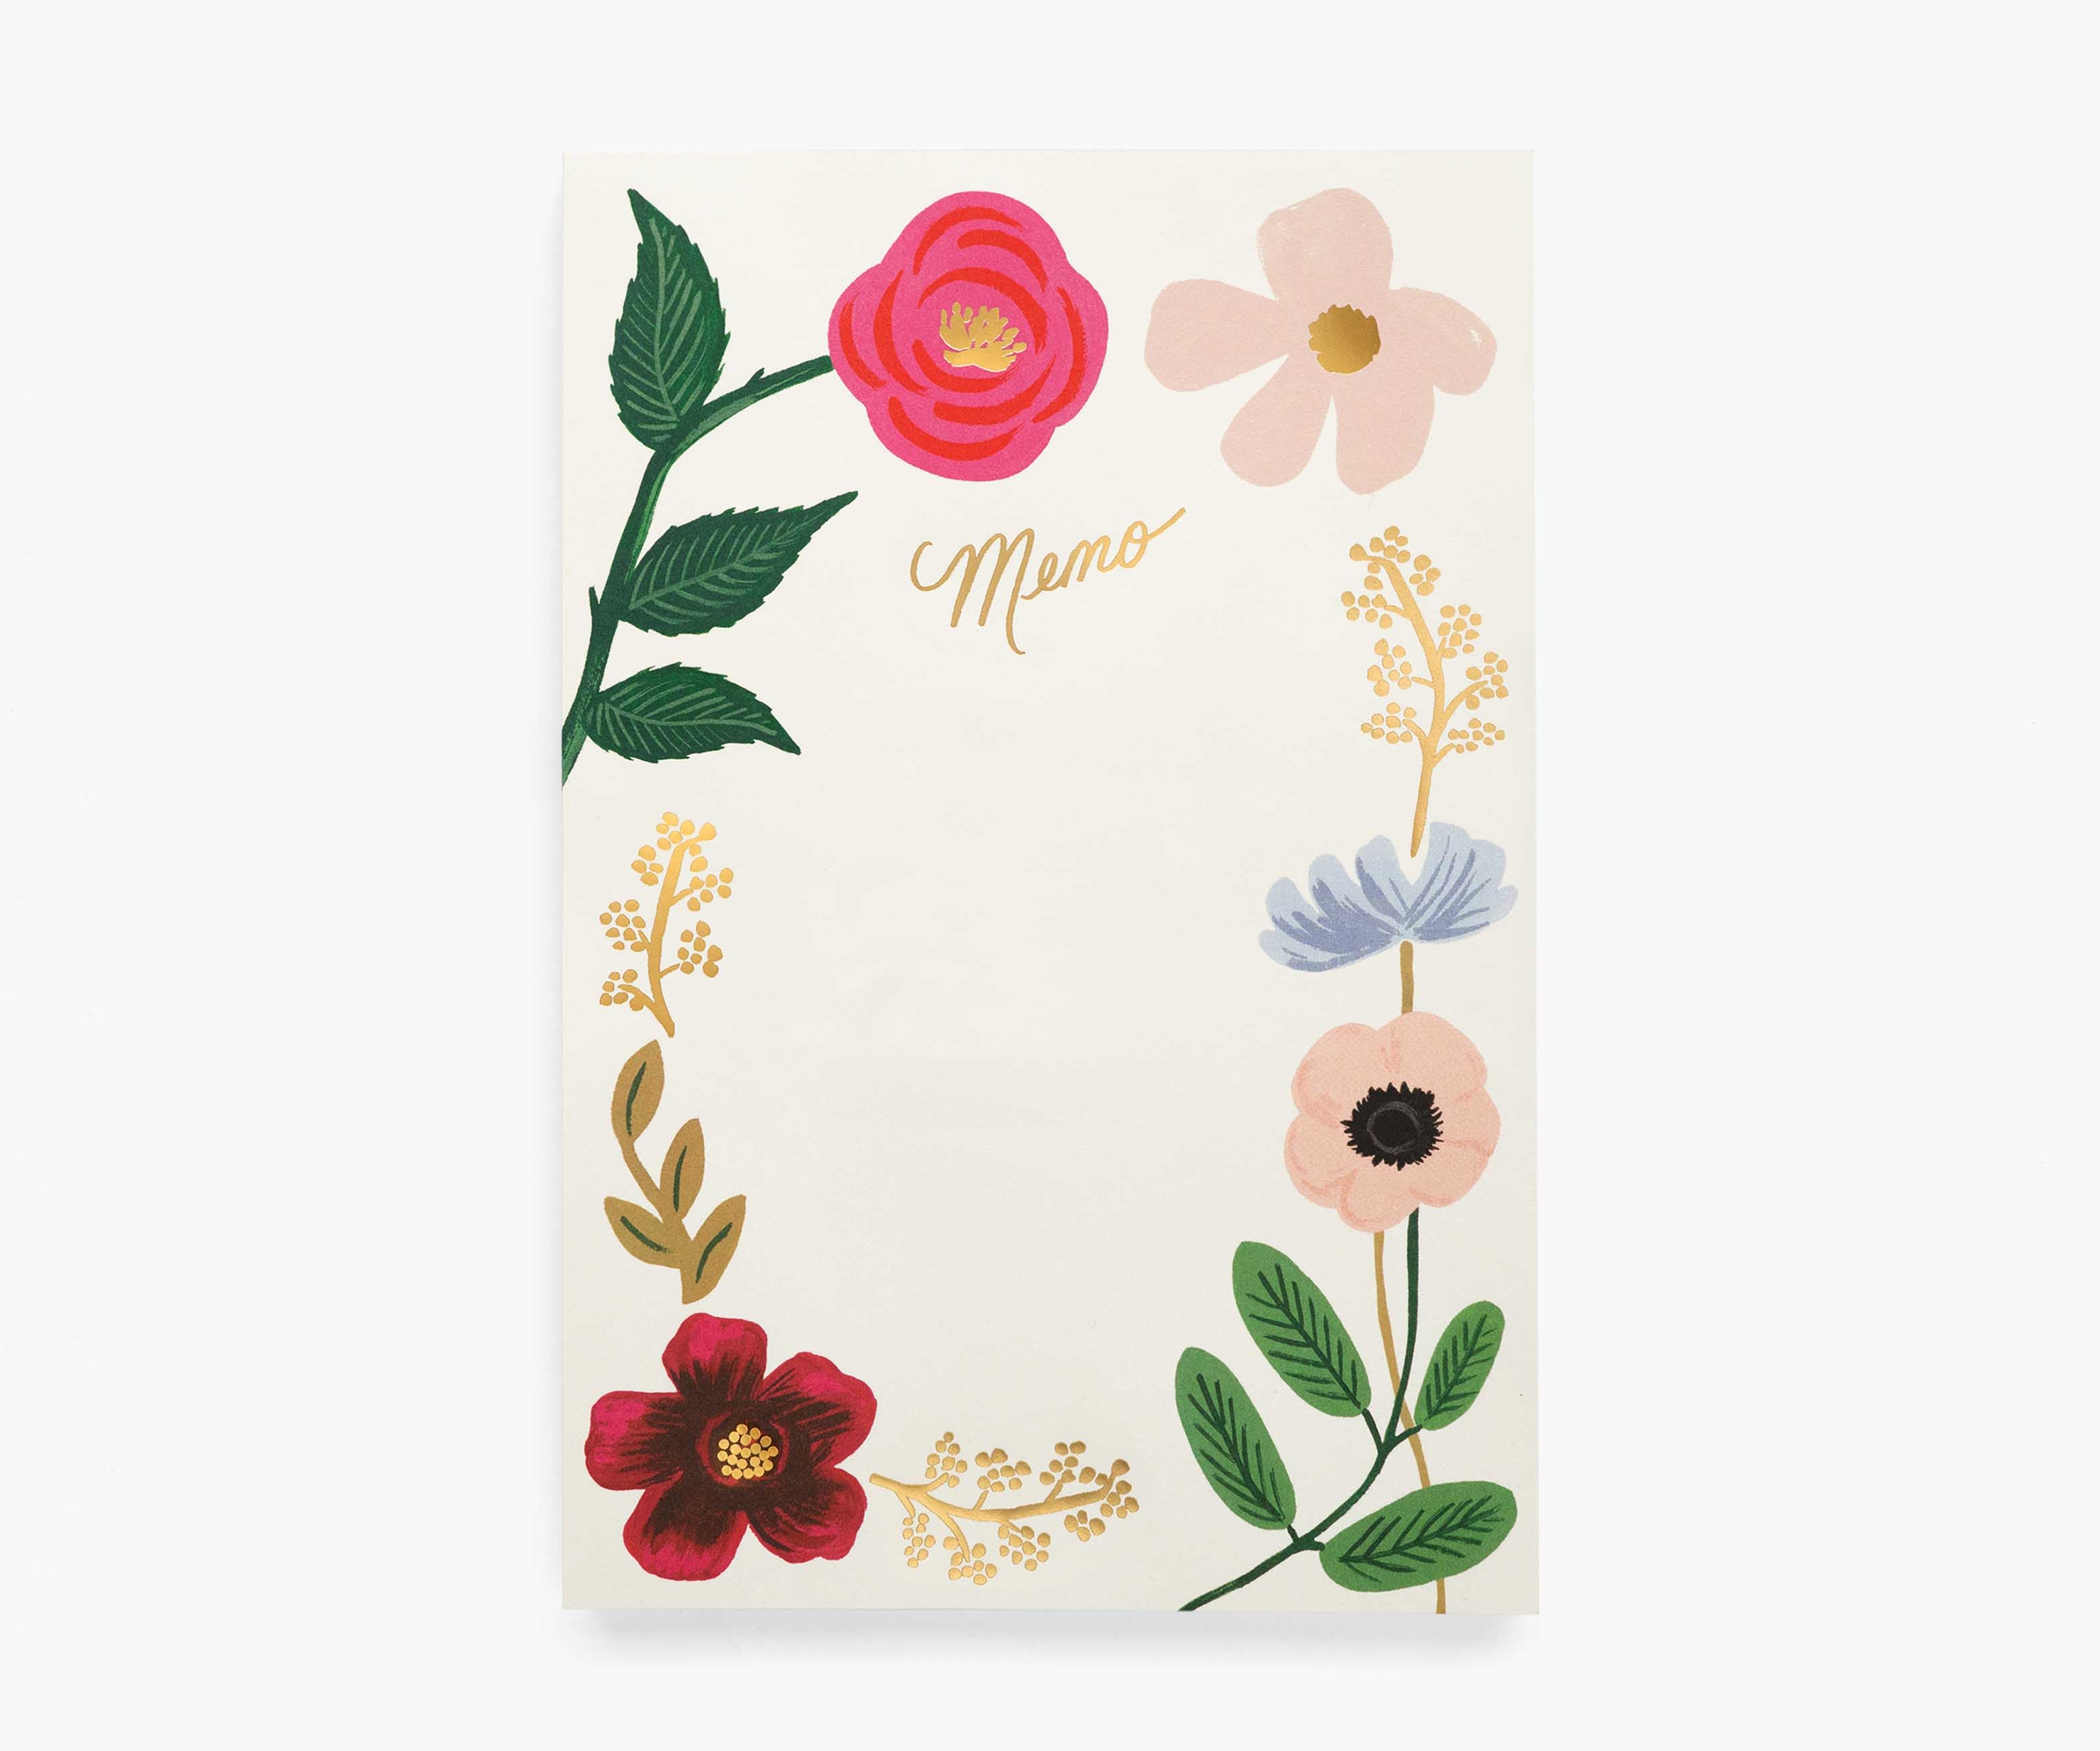 RIFLE PAPER CO. LARGE MEMO PAD - WEEKLY — Pickle Papers